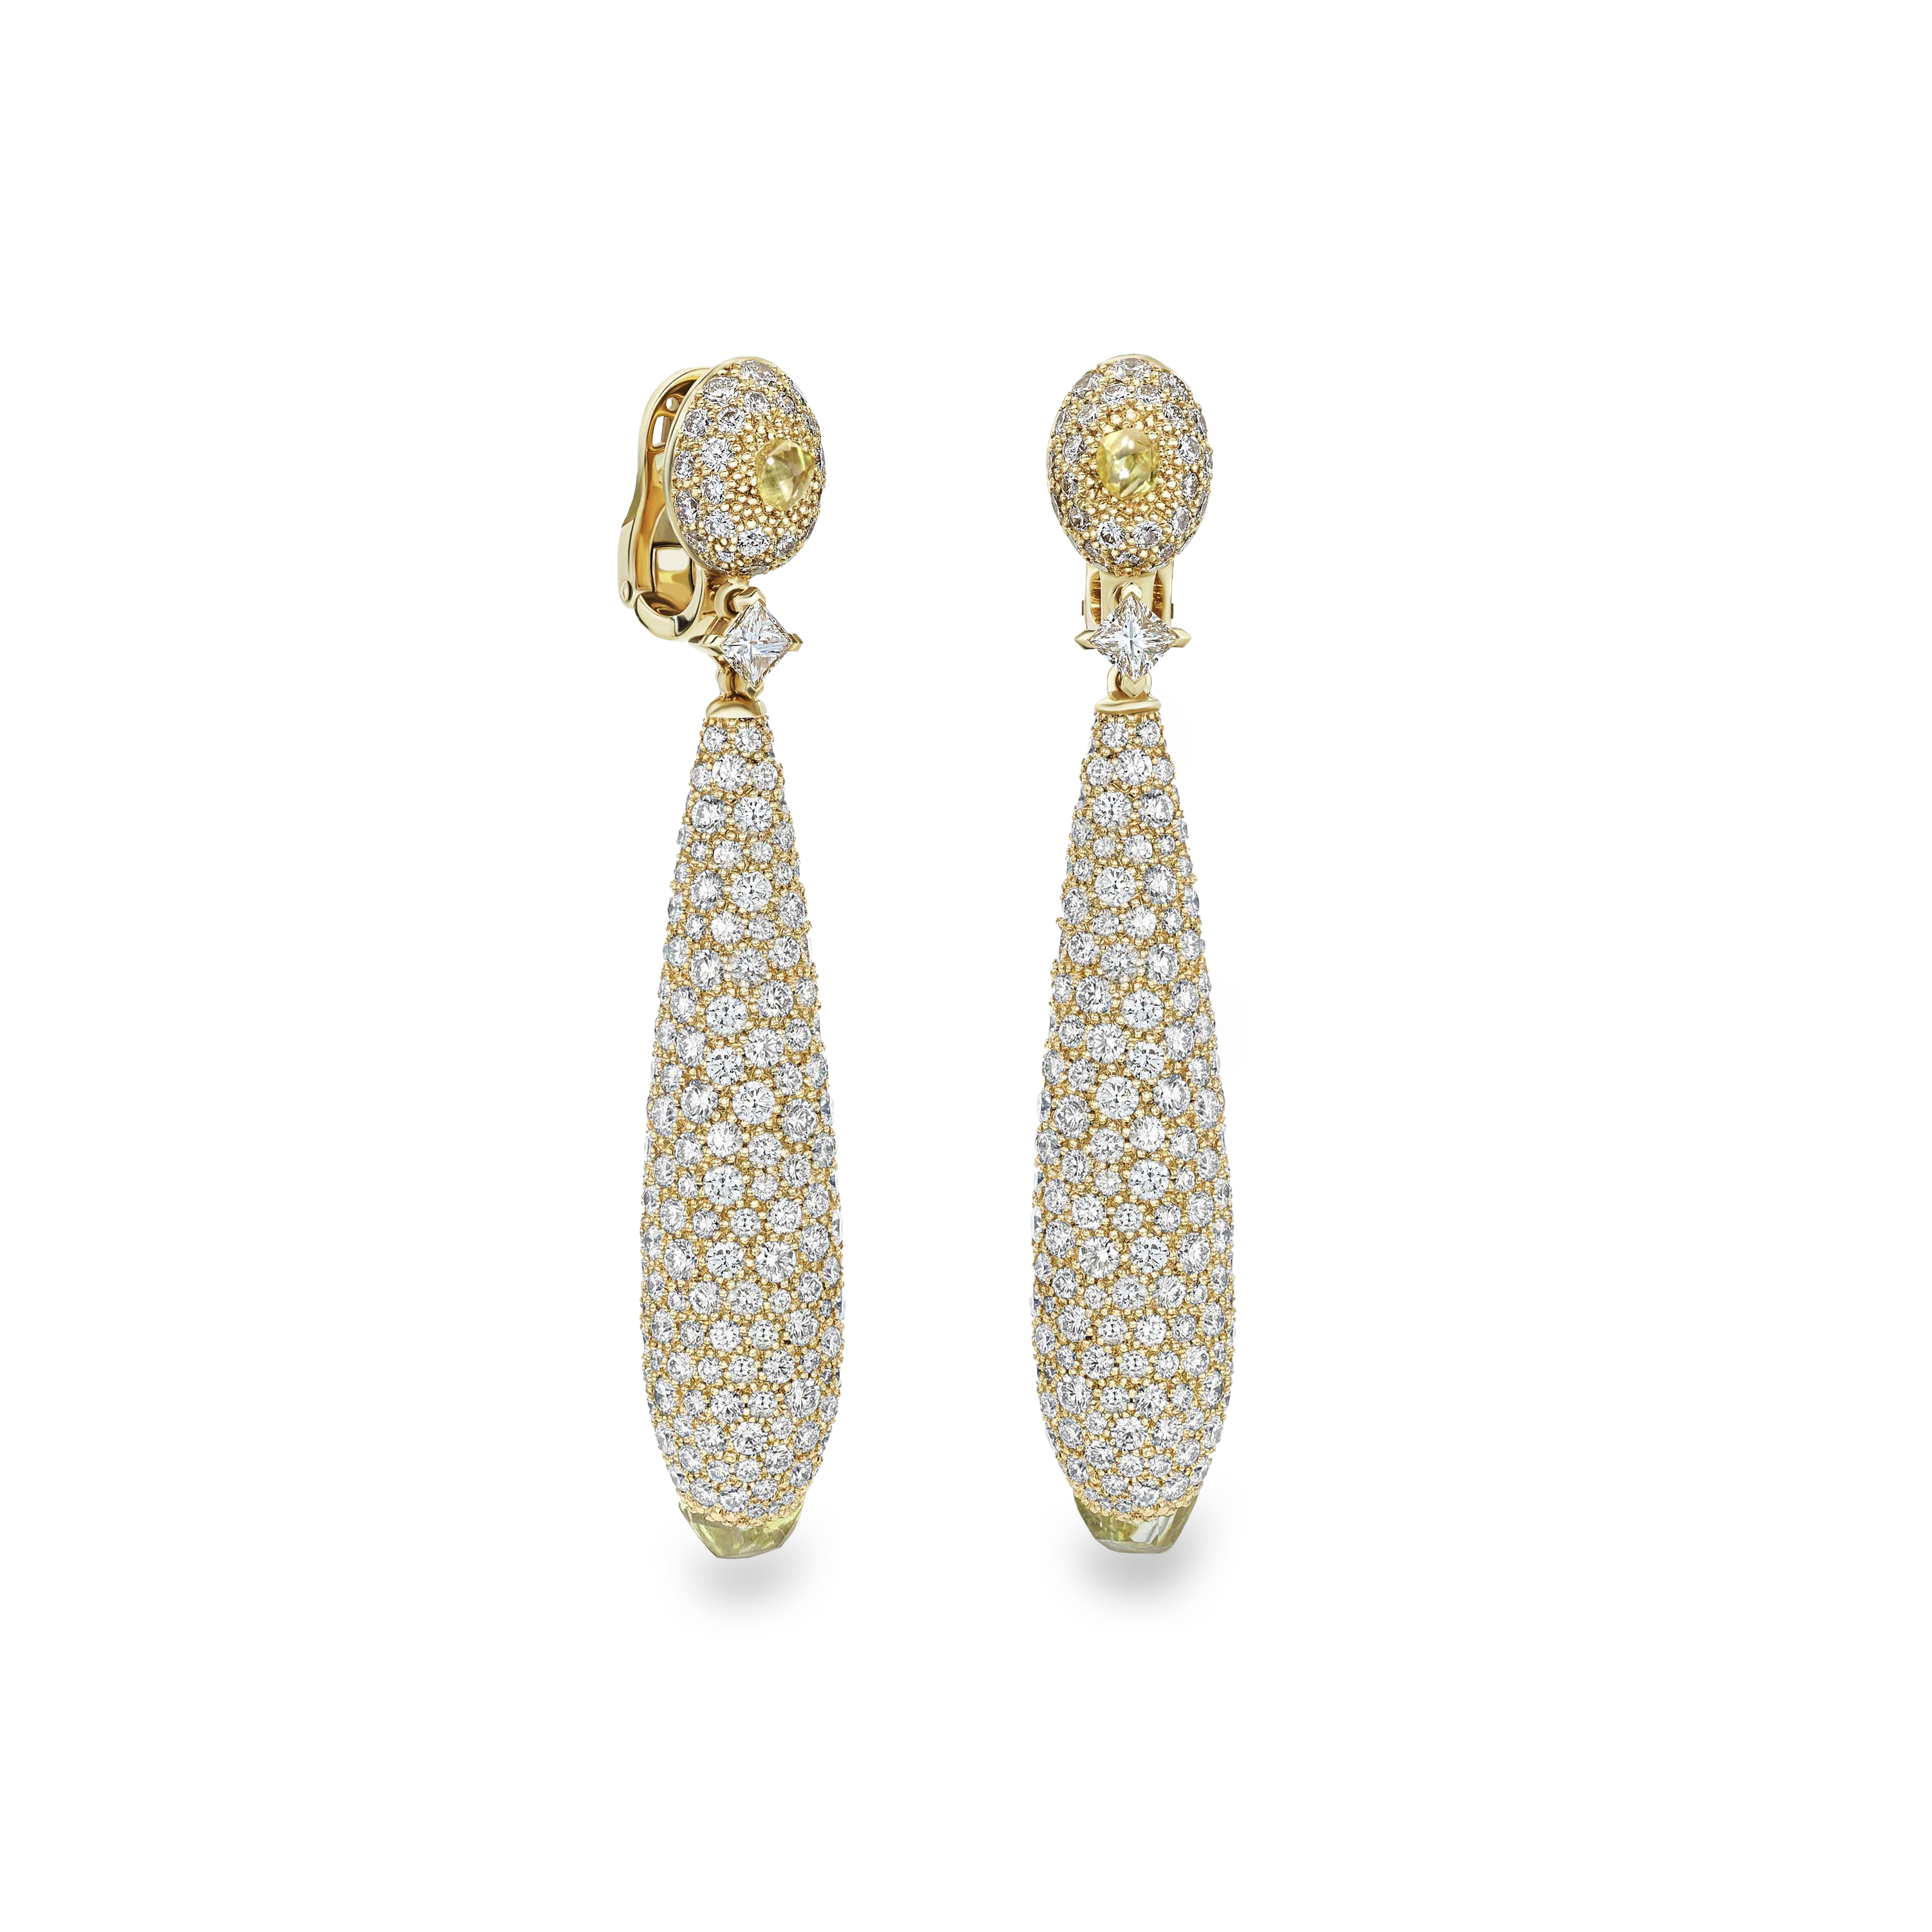 Talisman cocktail earrings in yellow gold, image 1